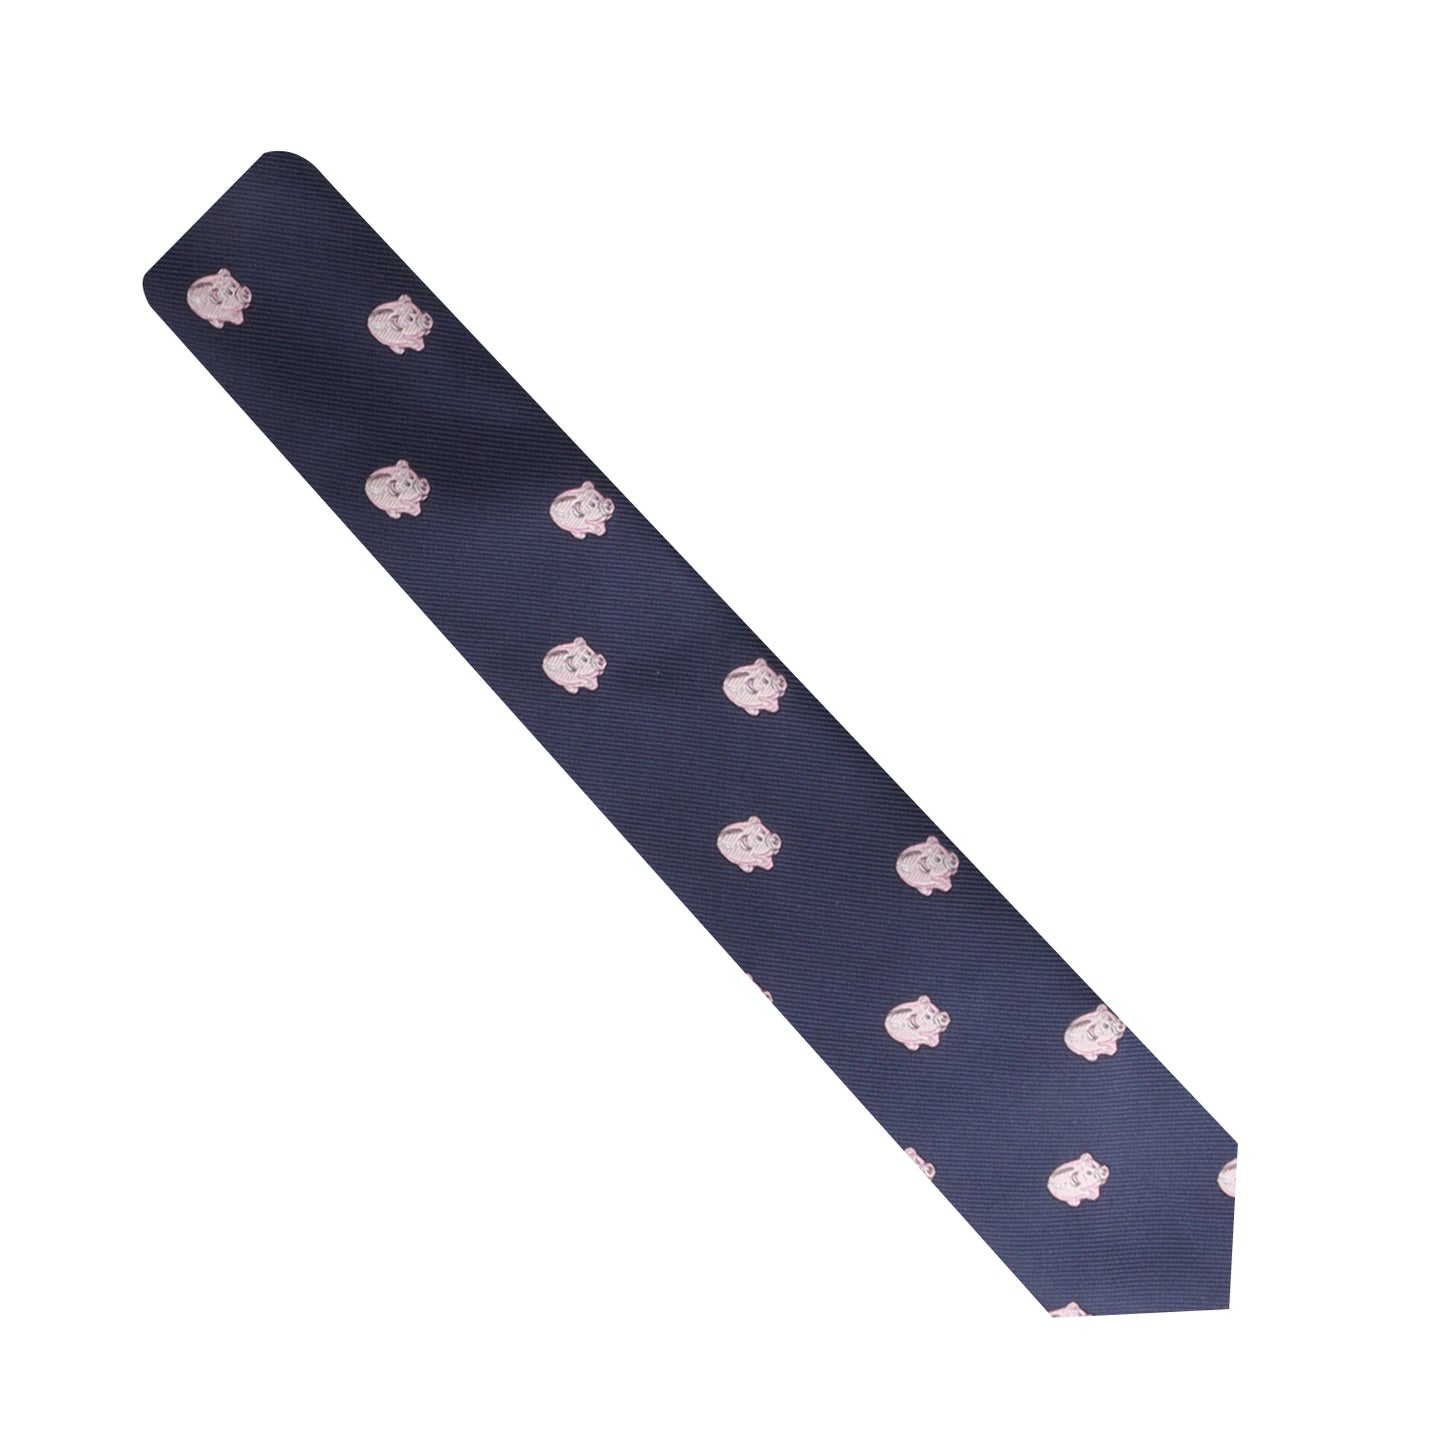 Invest in sophistication with the Piggy Bank Skinny Tie featuring a standout pattern of pink pigs.